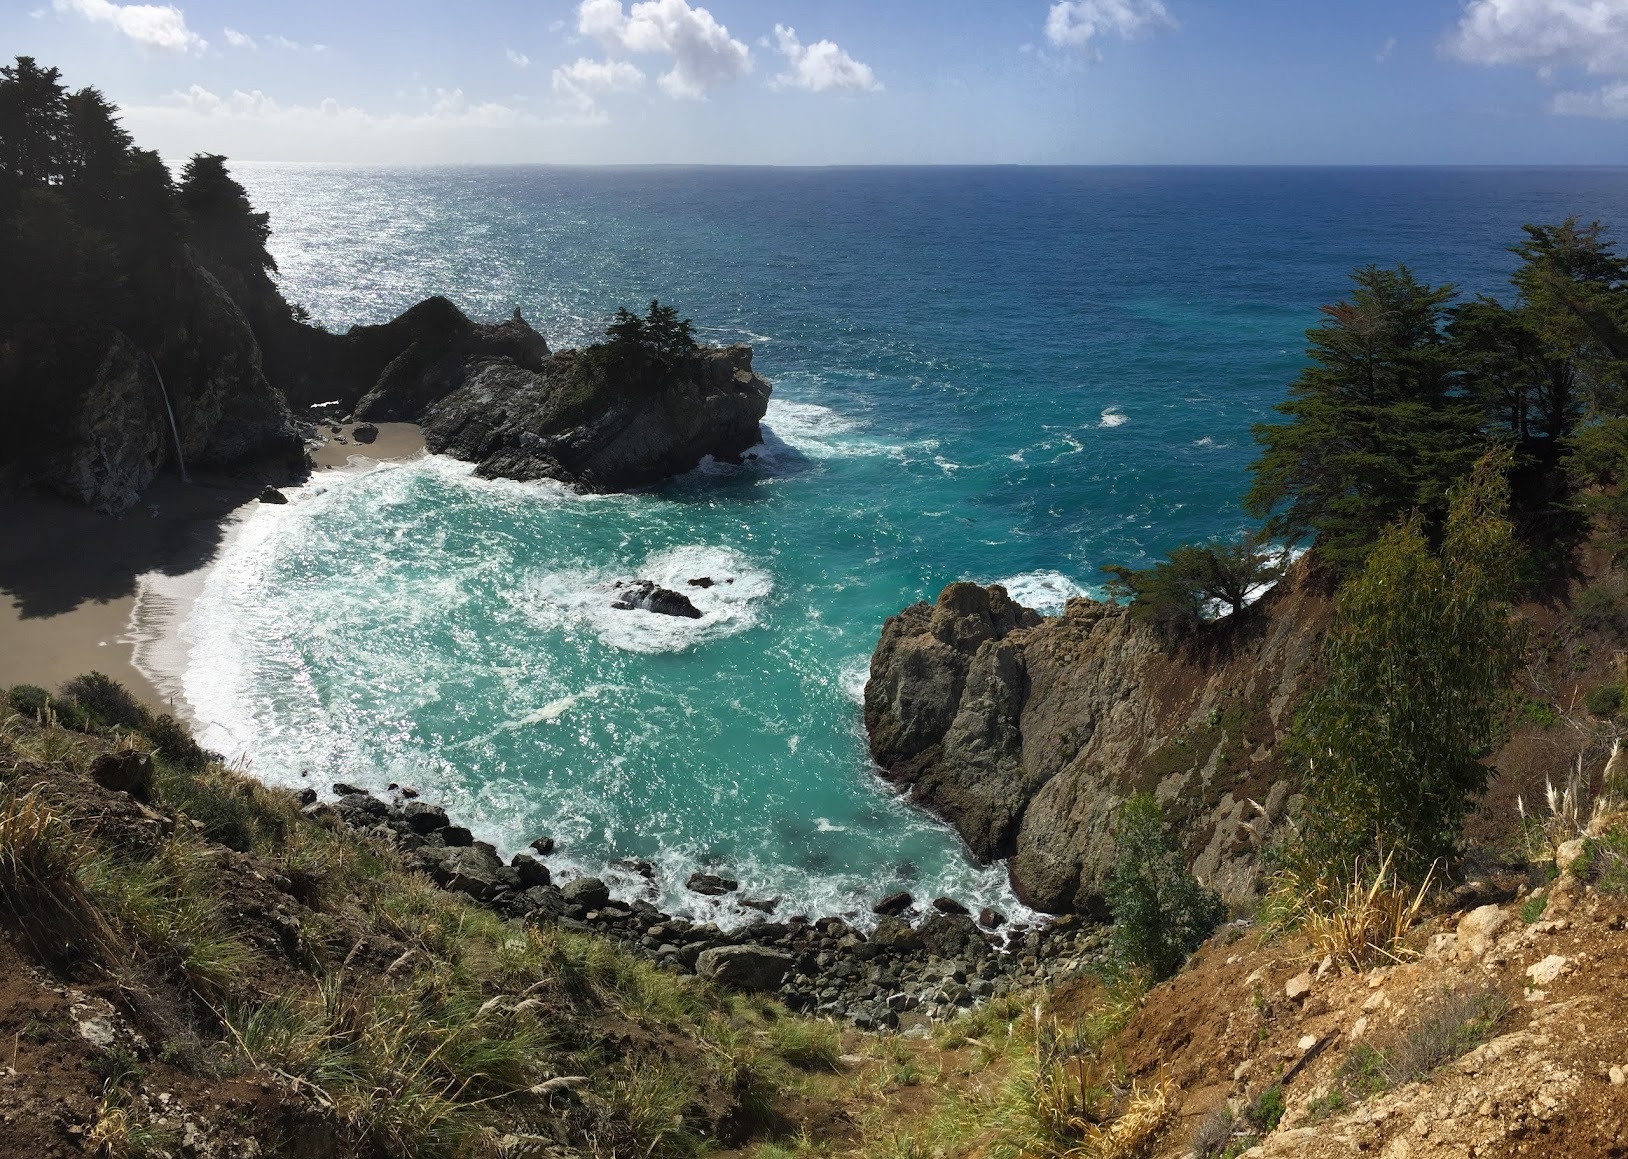 a rocky beach with trees and a rocky cliff with McWay Falls in the background